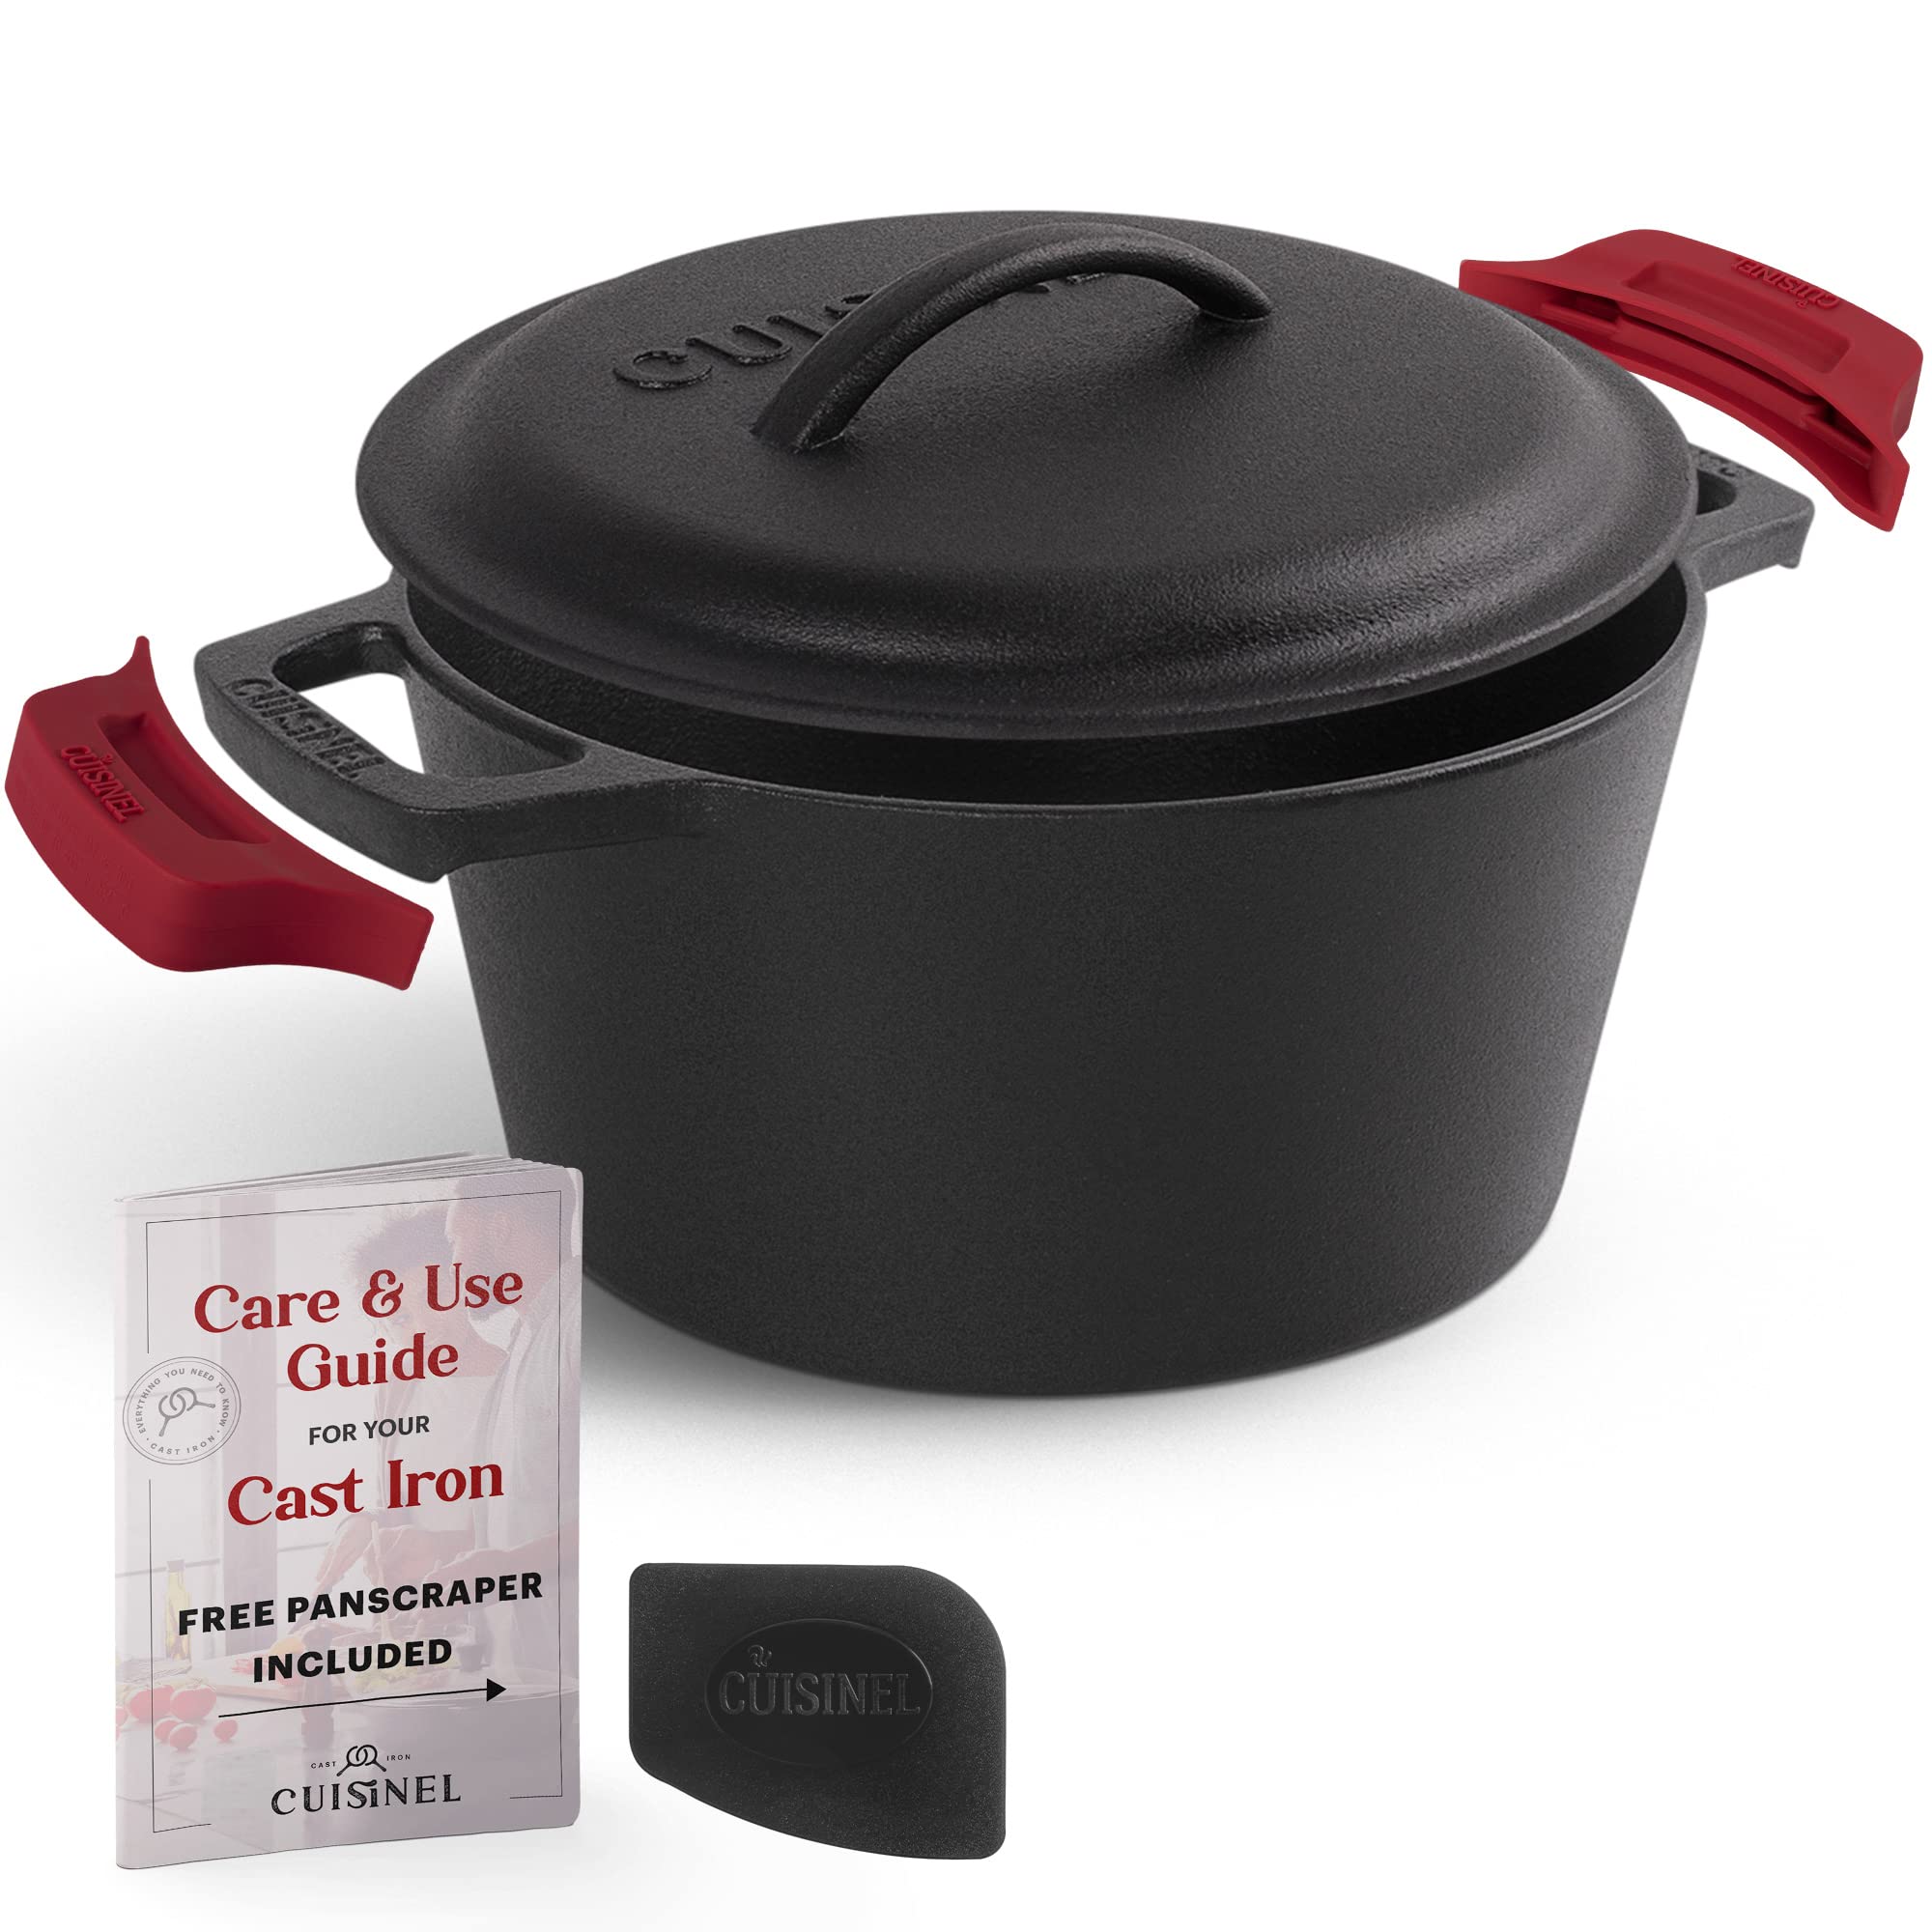 Cuisinel Cast Iron Dutch Oven/Combo Cooker + Silicone Handle Holder Covers + Pan Scraper/Cleaner - Pre-Seasoned Indoor/Outdoor Bread Baking Pot and Skillet Frying Pan - Kitchen Cookware  - Like New